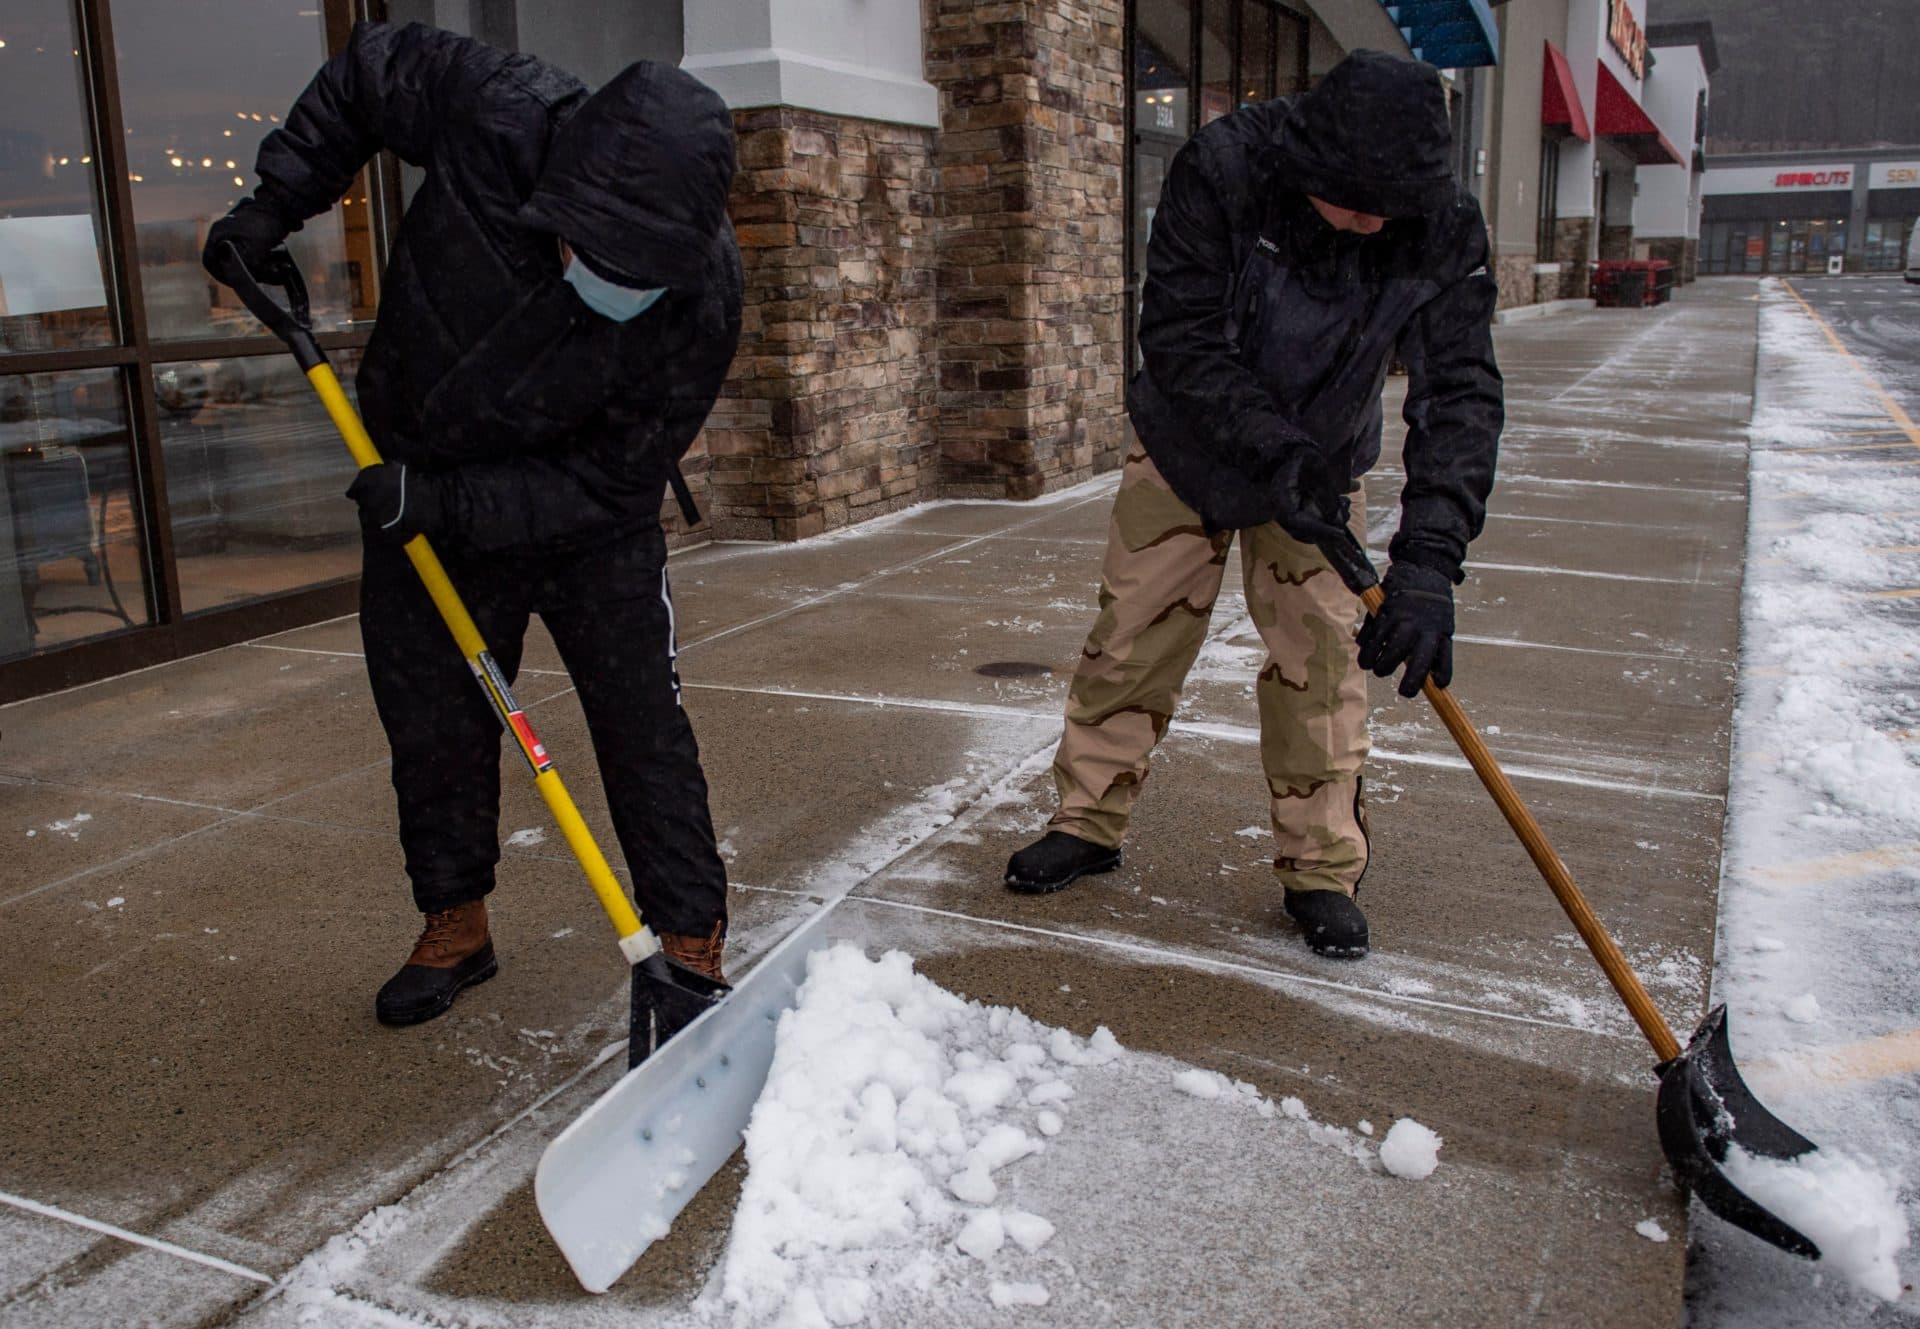 Workers clear snow and sleet from a shopping plaza sidewalk during a winter storm in Saugus. (Joseph Prezioso / AFP via Getty Images)